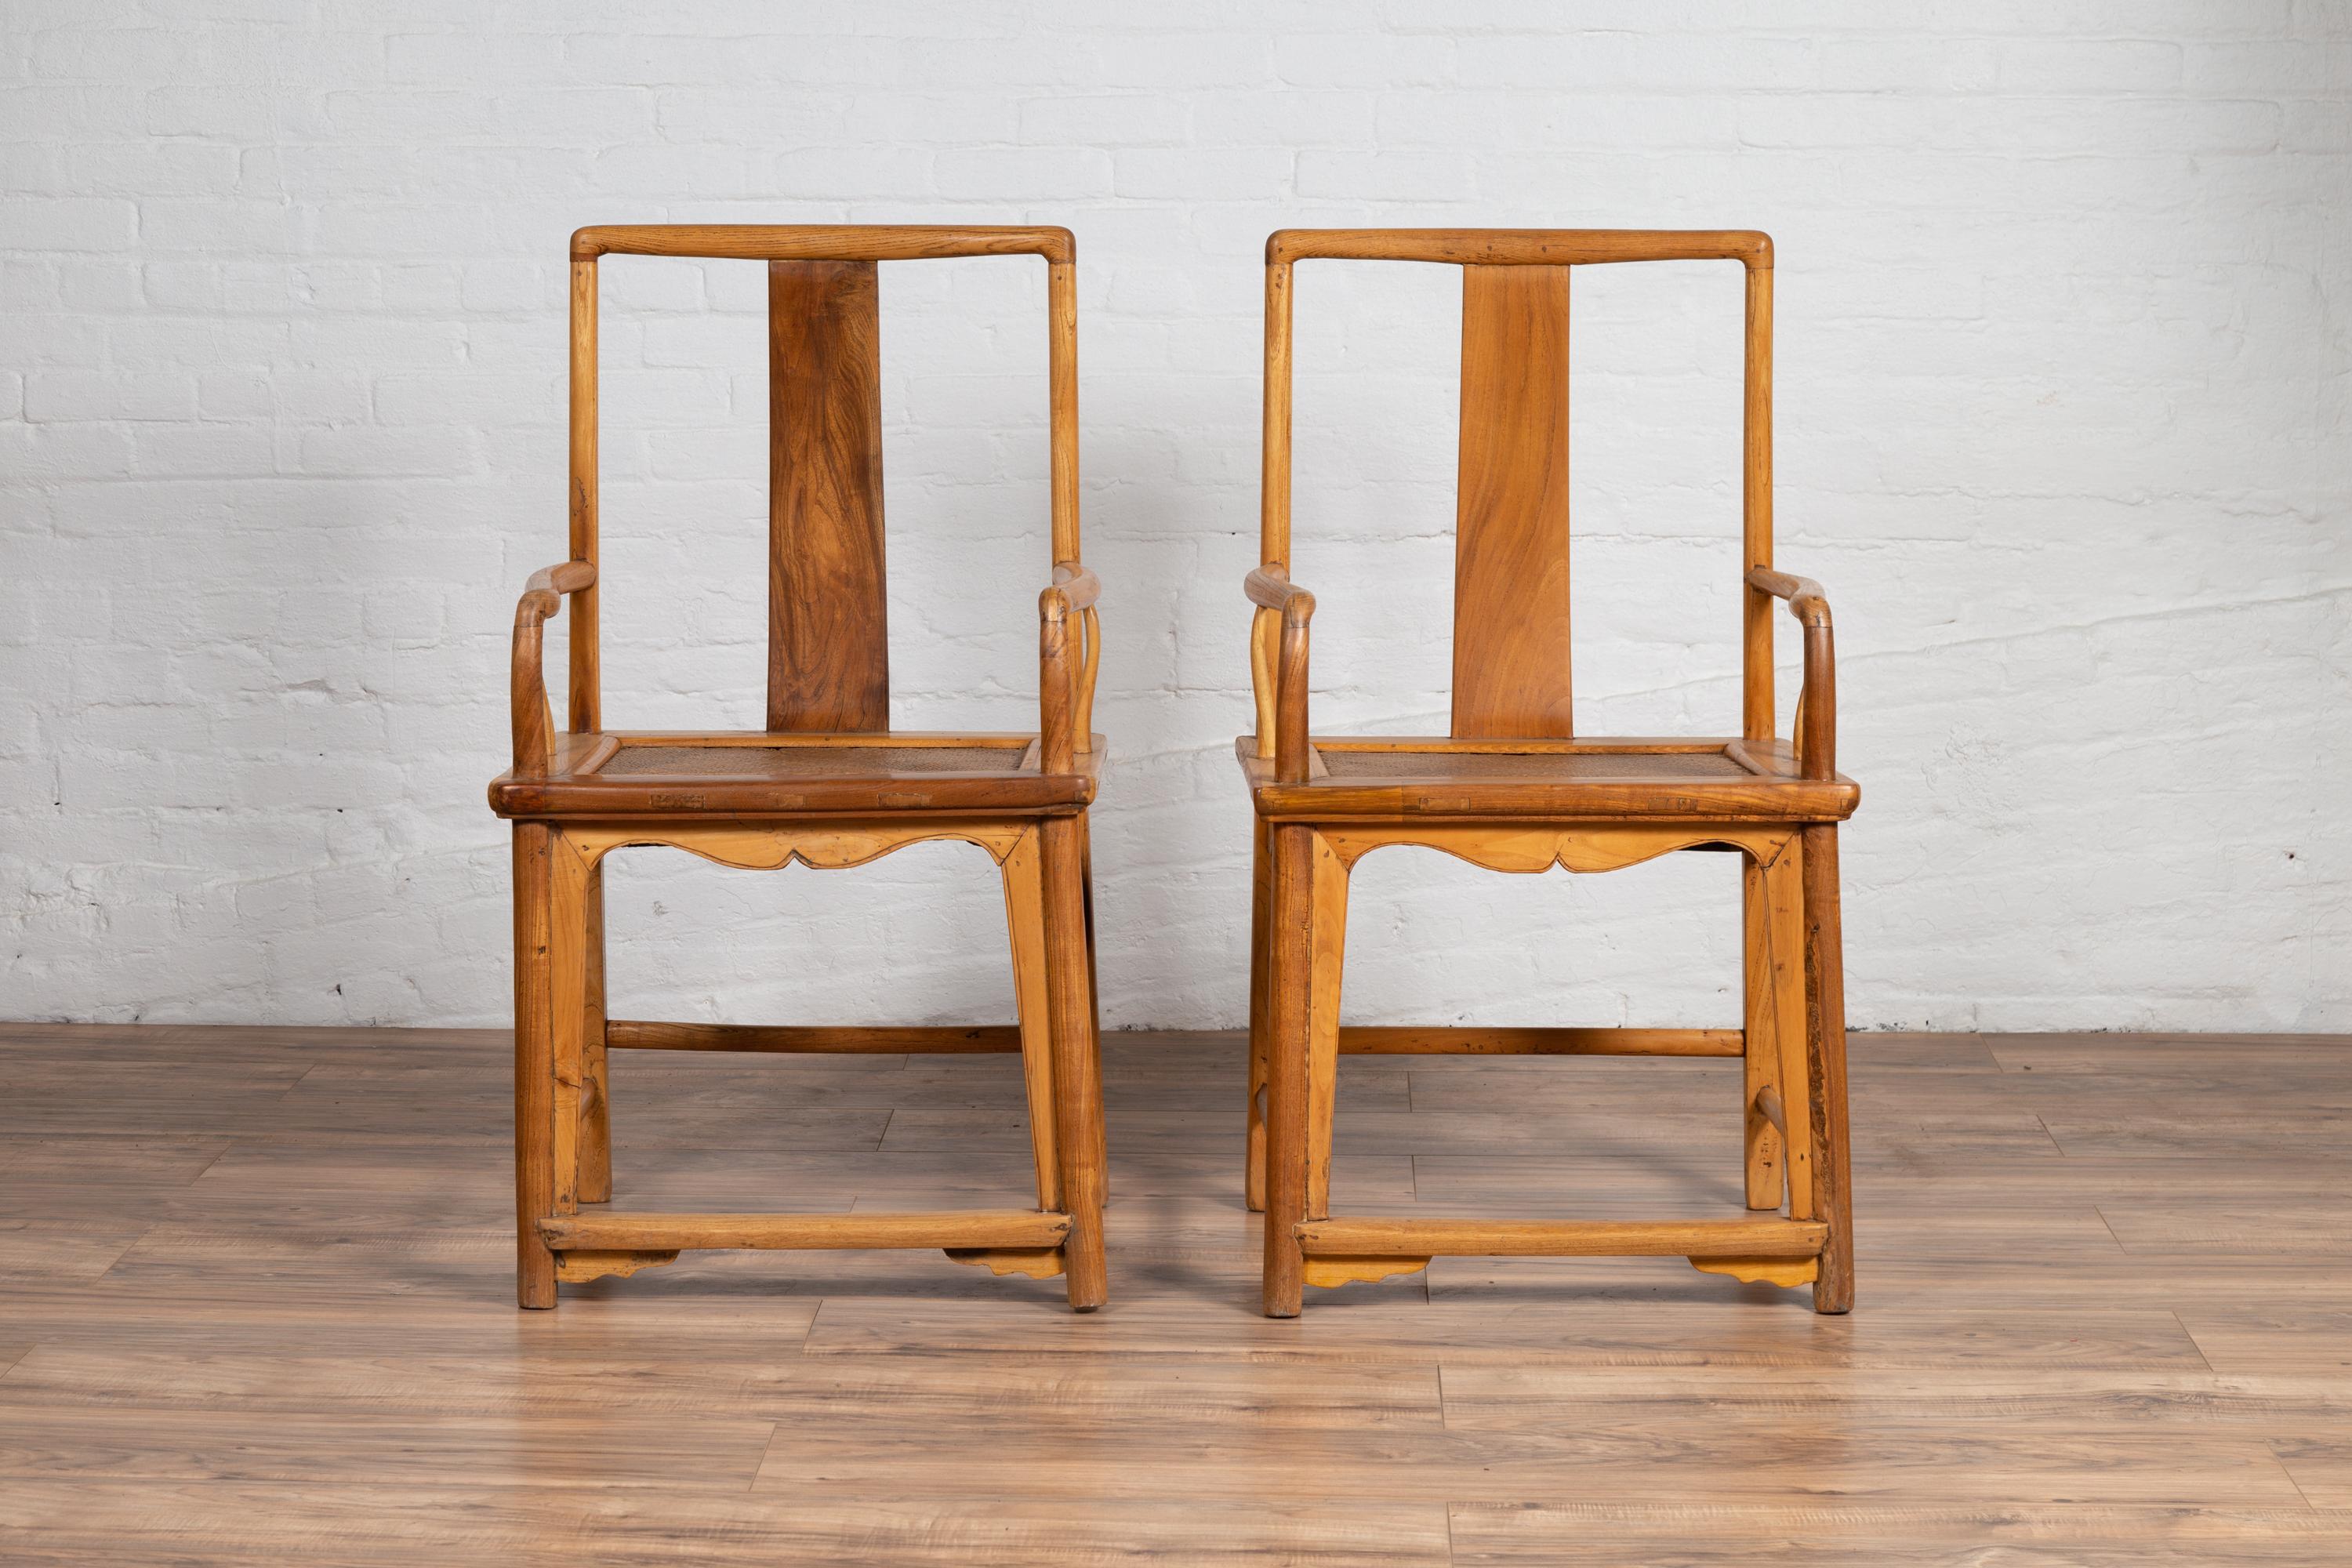 A near pair of Chinese Ming Dynasty style vintage wedding armchairs from the mid-20th century, with woven rattan seats, curving armrests and natural wood patina. Born in China during the mid-century period, each of this near pair (they present